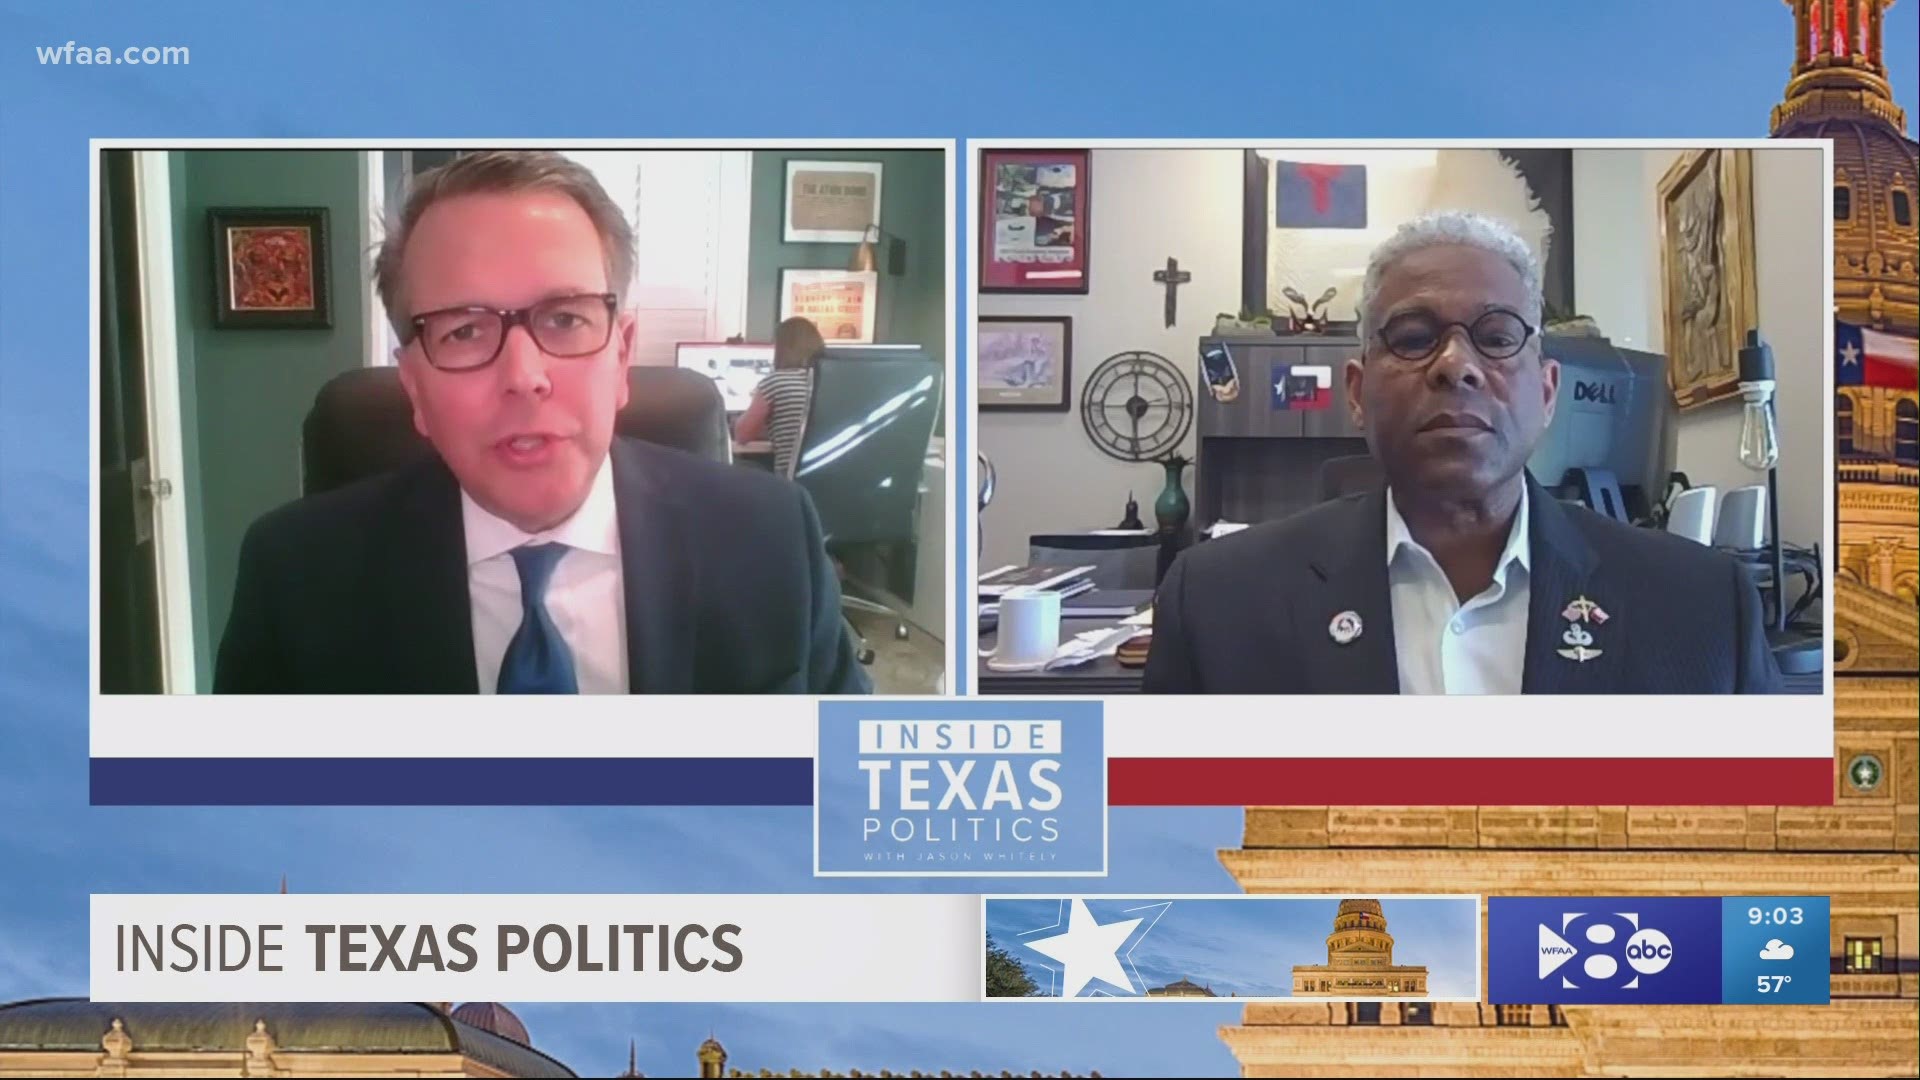 Texas GOP Chairman Allen West wouldn't say specifically whether he thought Gov. Greg Abbott would be "primaried," but did discuss the next Speaker of the House race.